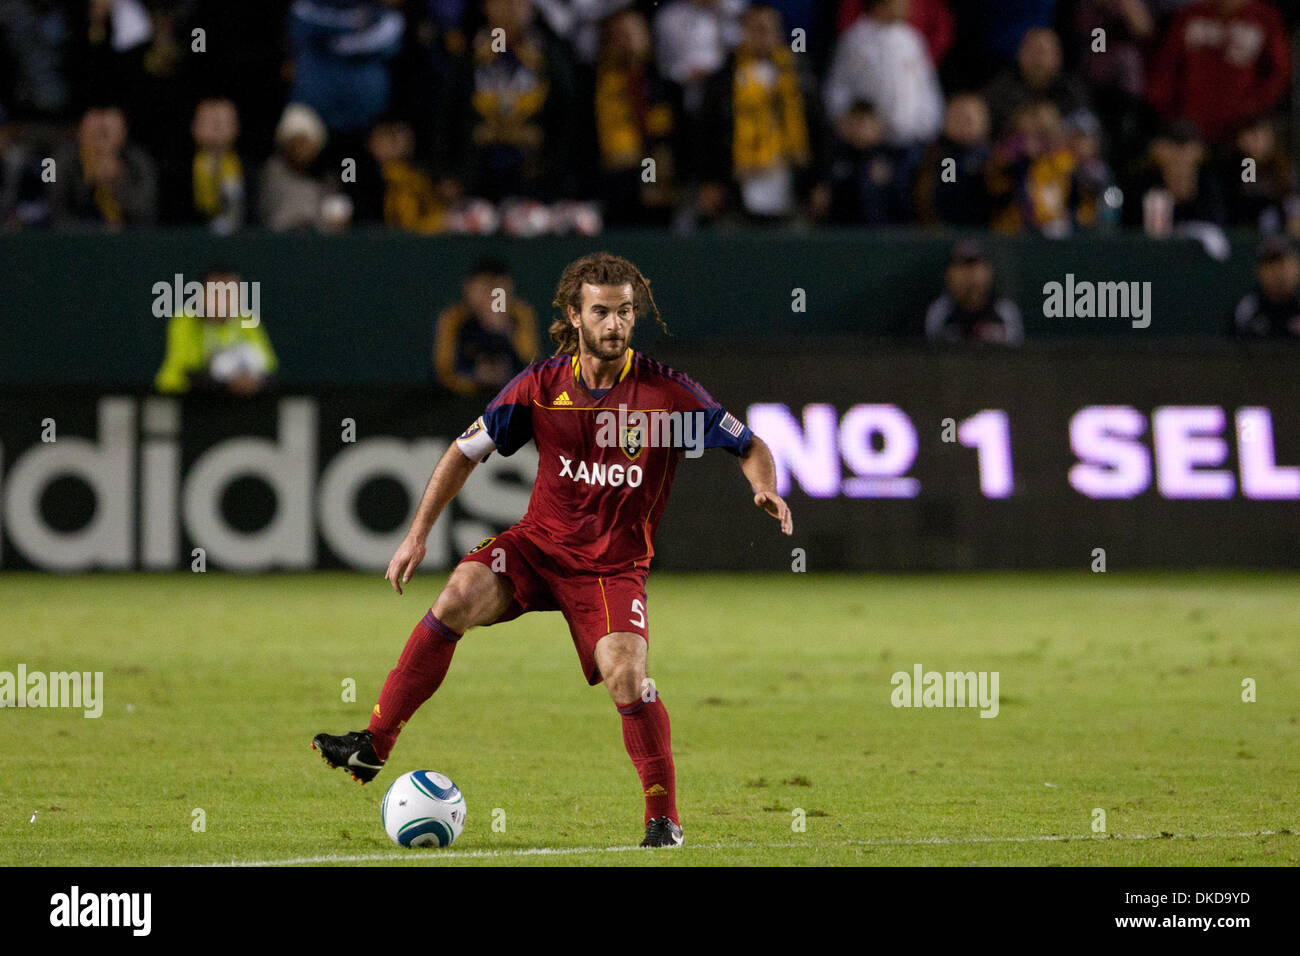 Nov. 6, 2011 - Carson, California, U.S - Real Salt Lake midfielder Kyle Beckerman #5 during the Major League Soccer Western Confrence Final game between Real Salt Lake and the Los Angeles Galaxy at the Home Depot Center. The Galaxy went on to defeat Salt Lake with a final score of 3-1. (Credit Image: © Brandon Parry/Southcreek/ZUMAPRESS.com) Stock Photo